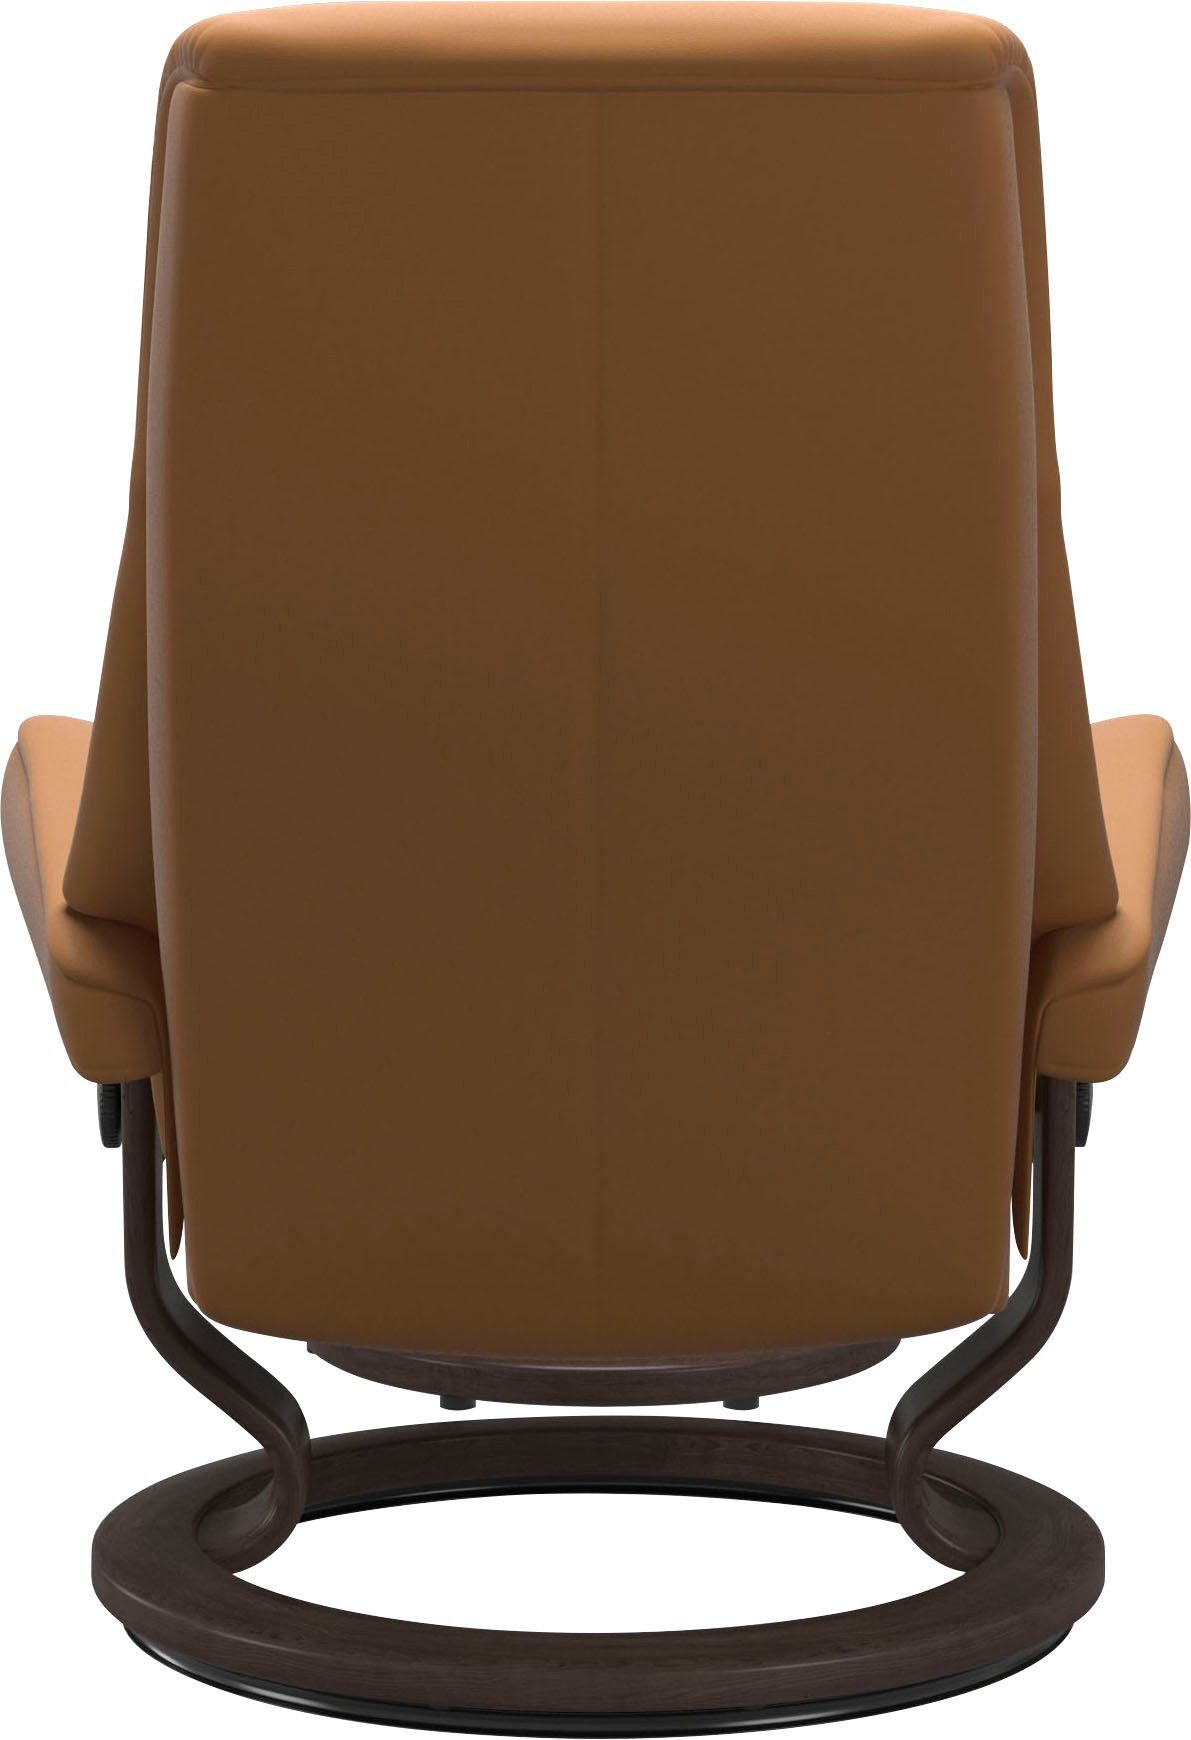 Größe L,Gestell View, Base, Relaxsessel Wenge Classic mit Stressless®